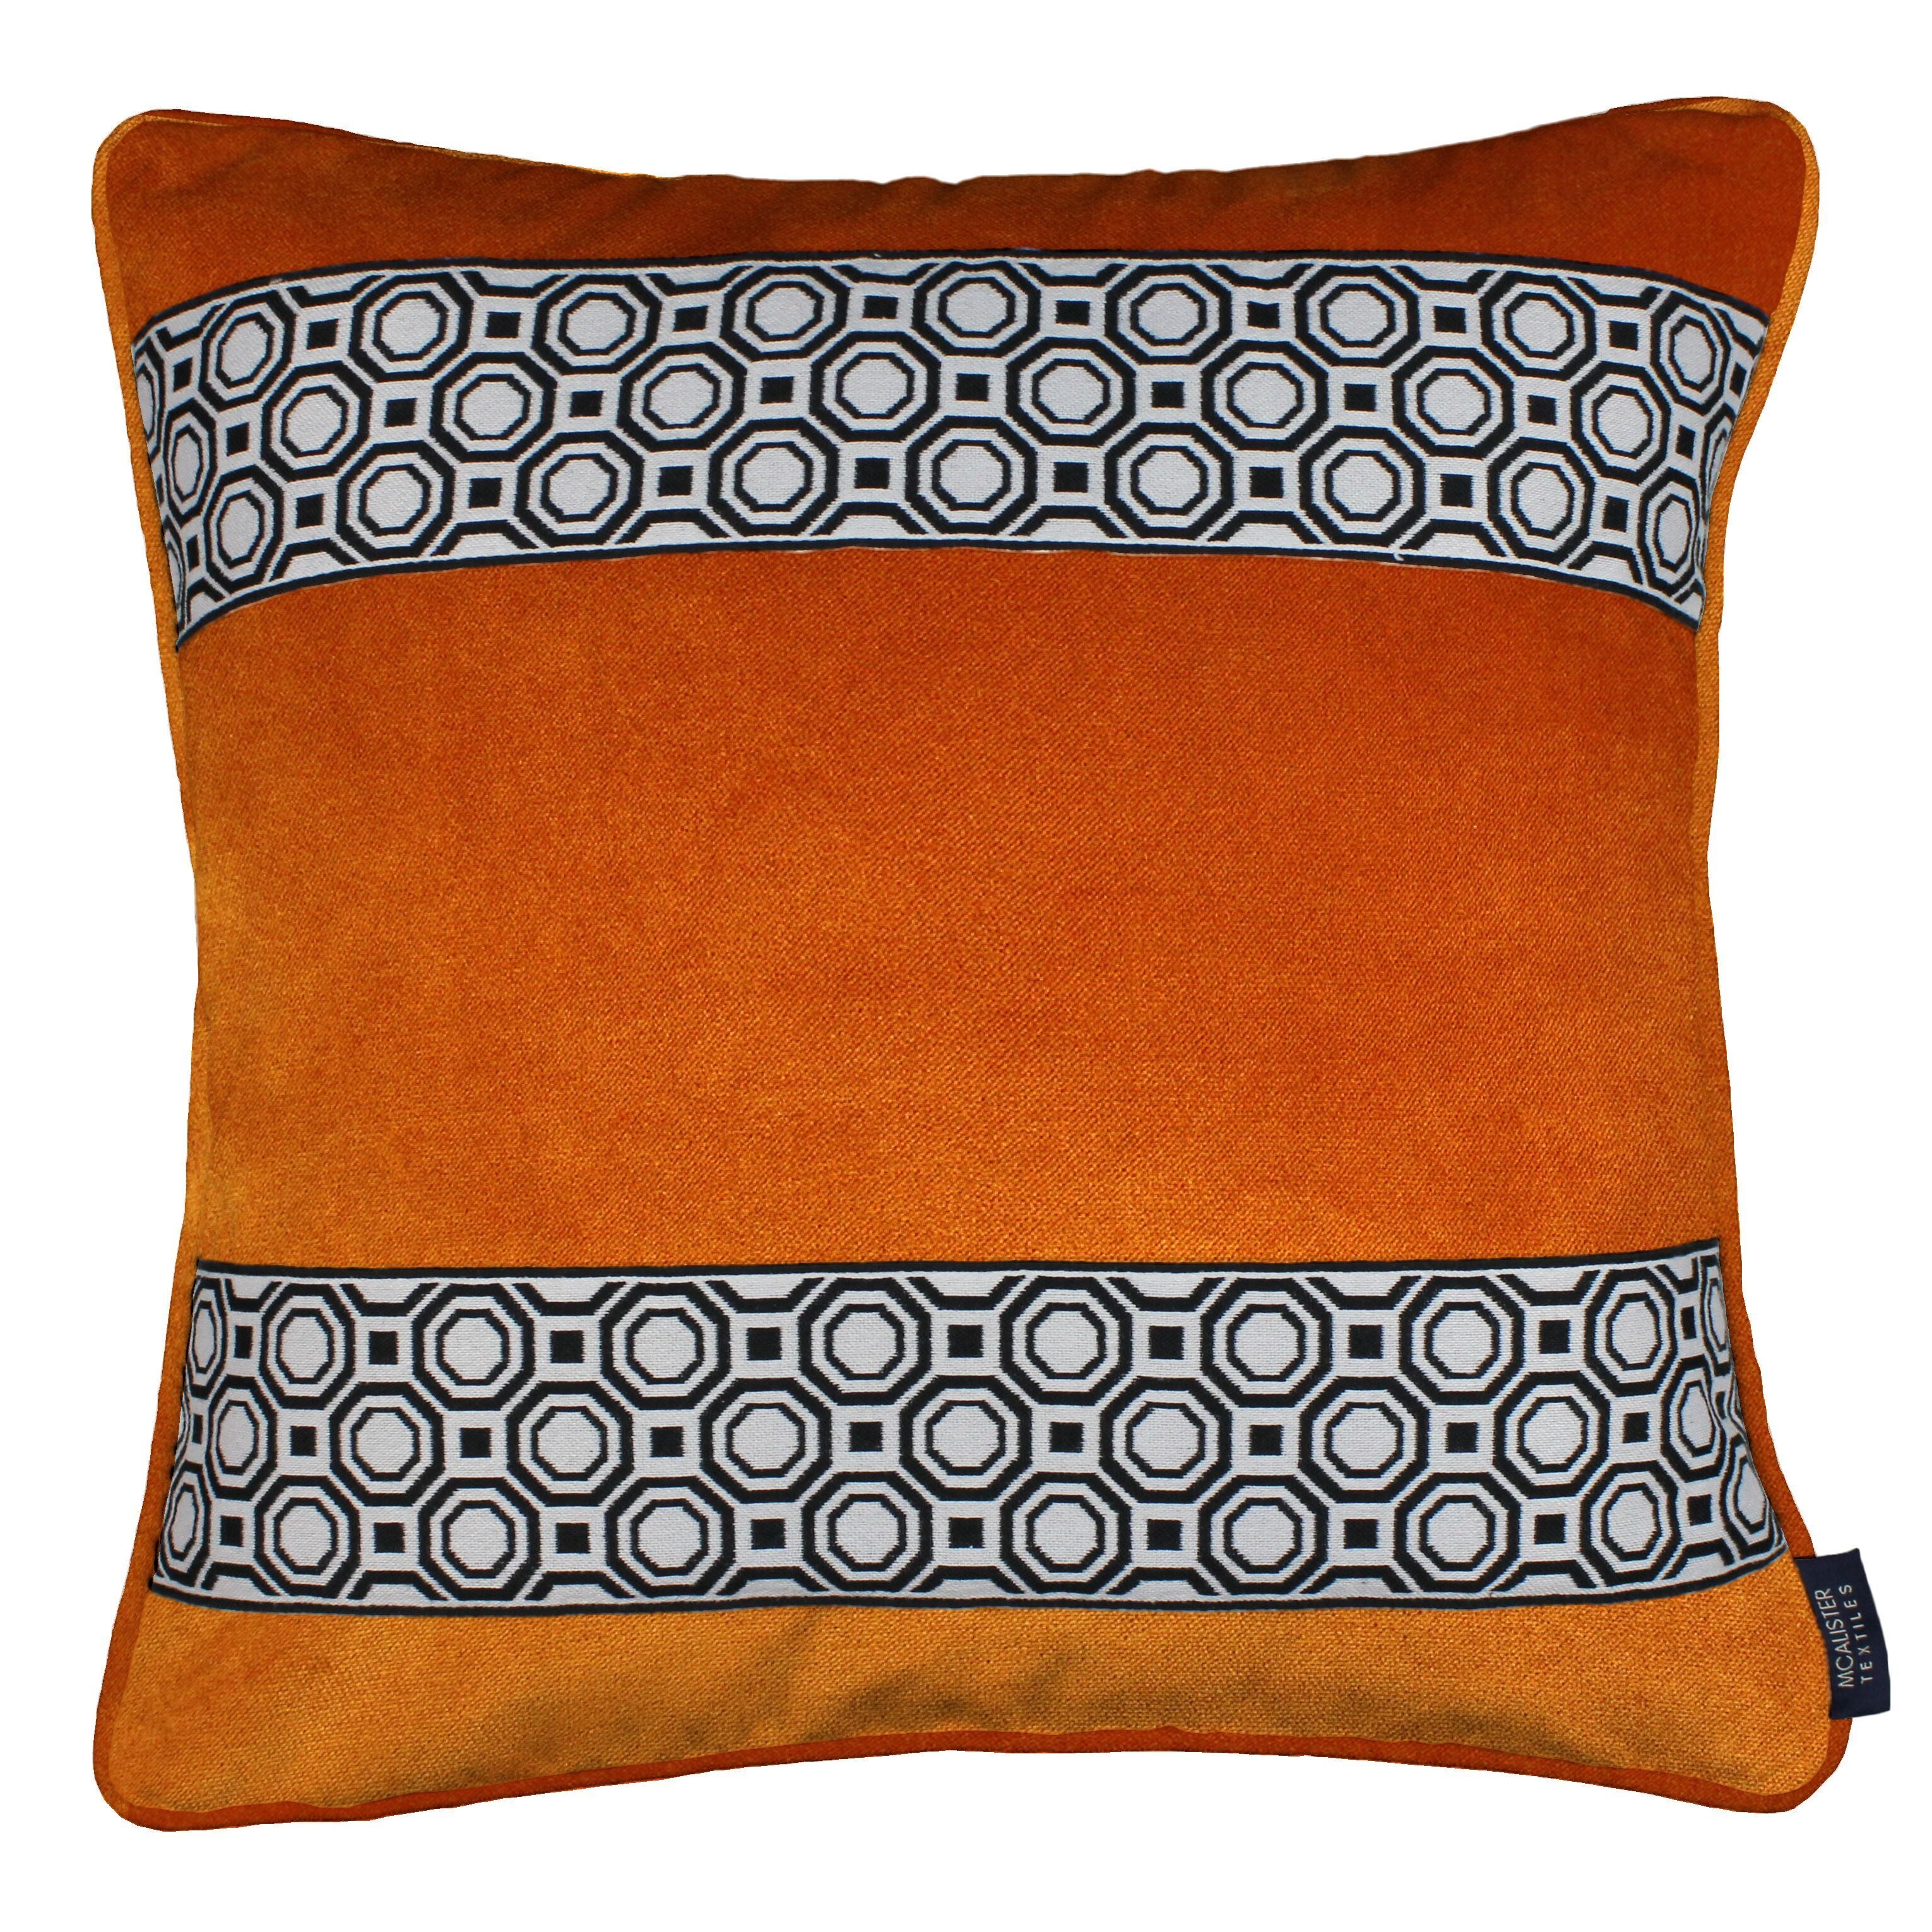 McAlister Textiles Cancun Striped Burnt Orange Velvet Cushion Cushions and Covers Polyester Filler 43cm x 43cm 